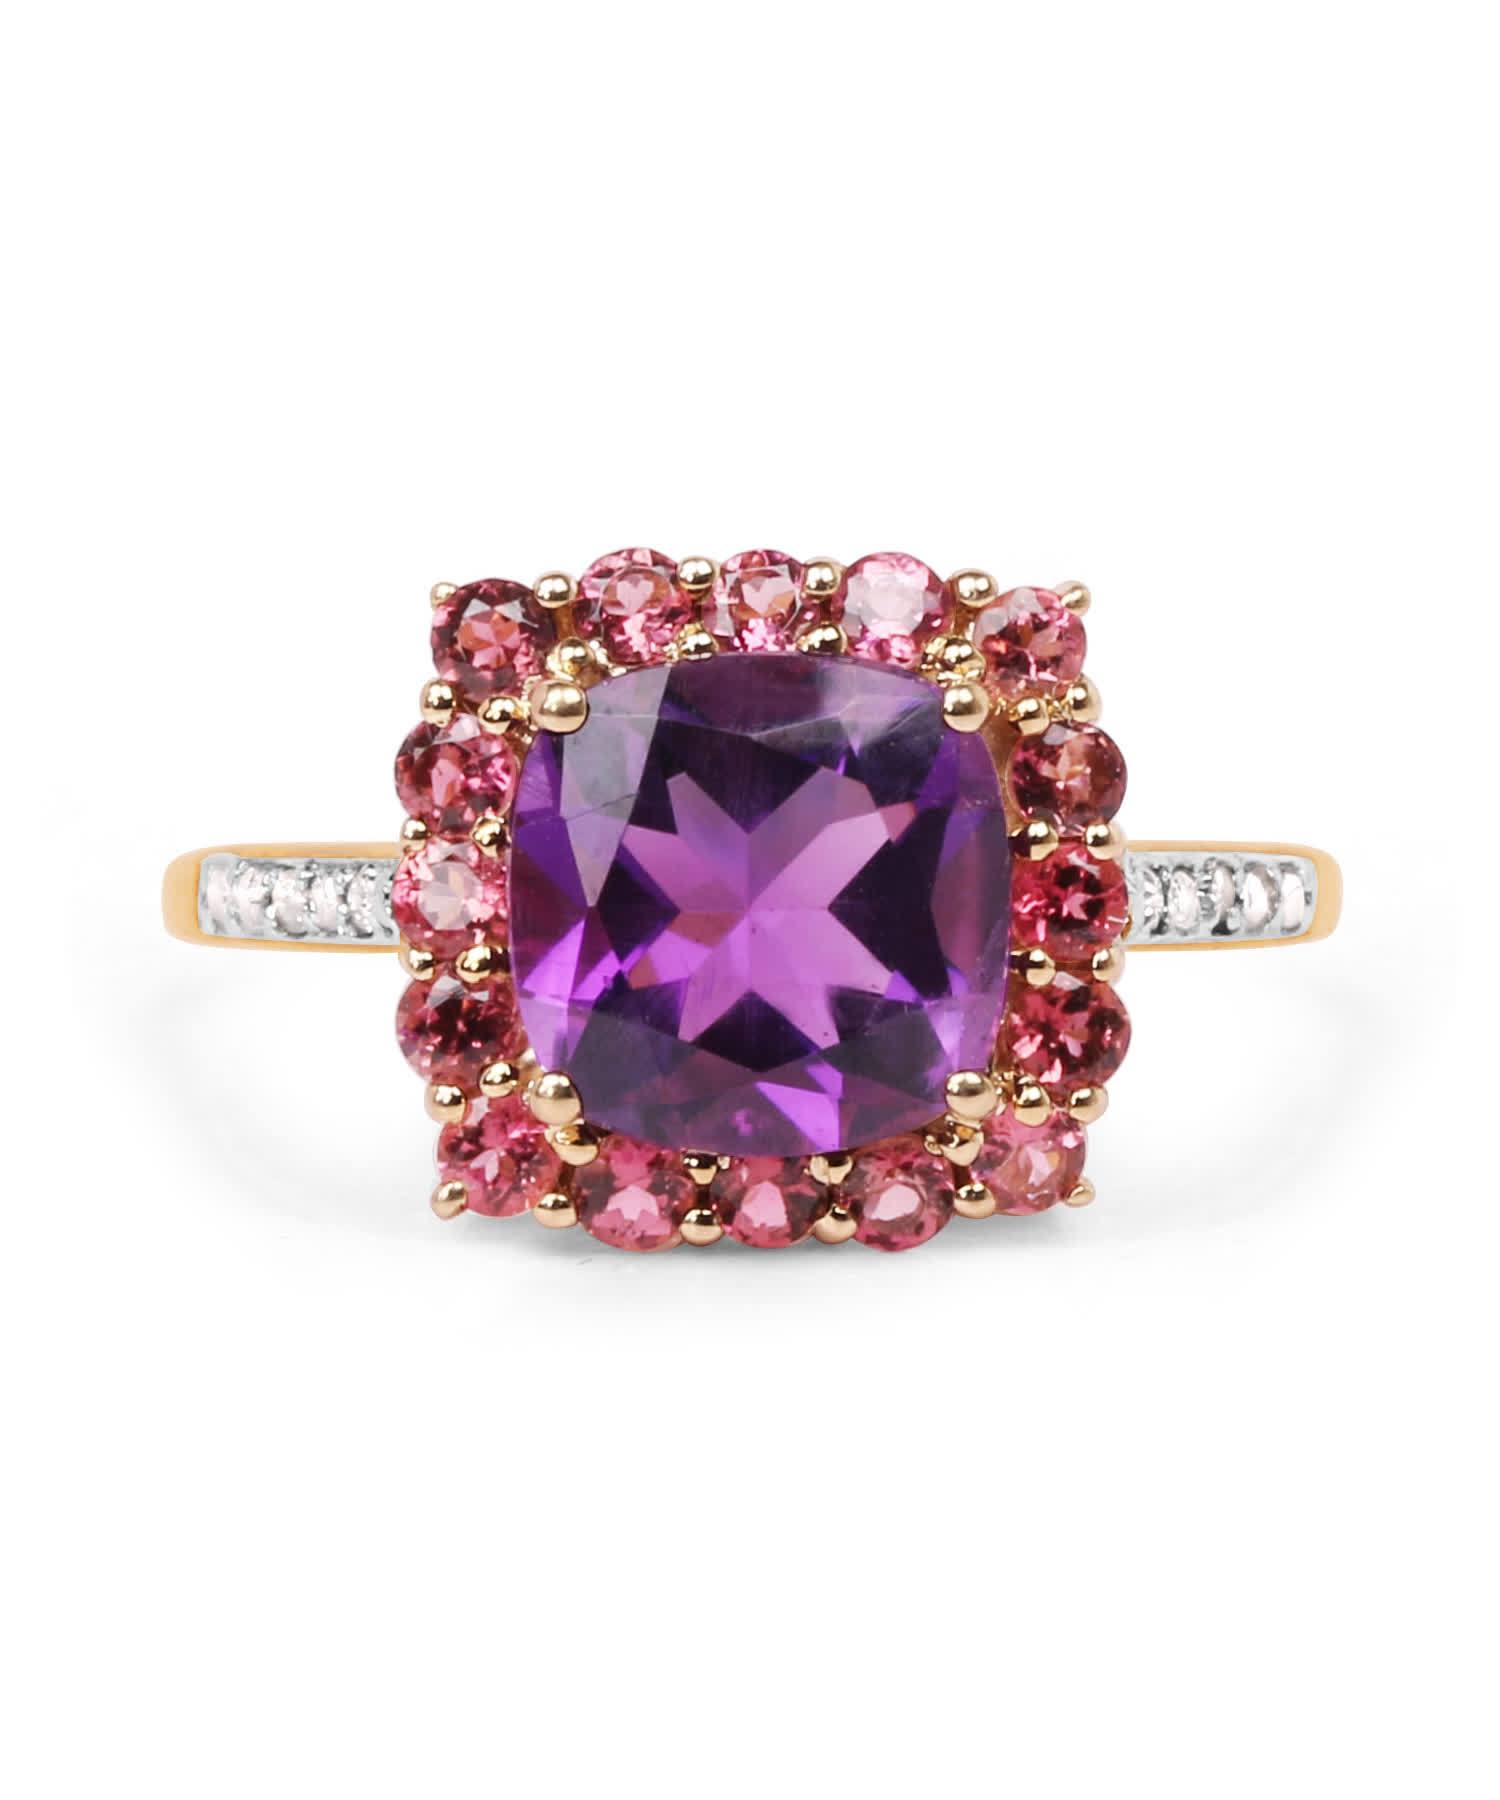 2.38ctw Natural Amethyst, Pink Tourmaline and Diamond 10k Gold Ring View 3